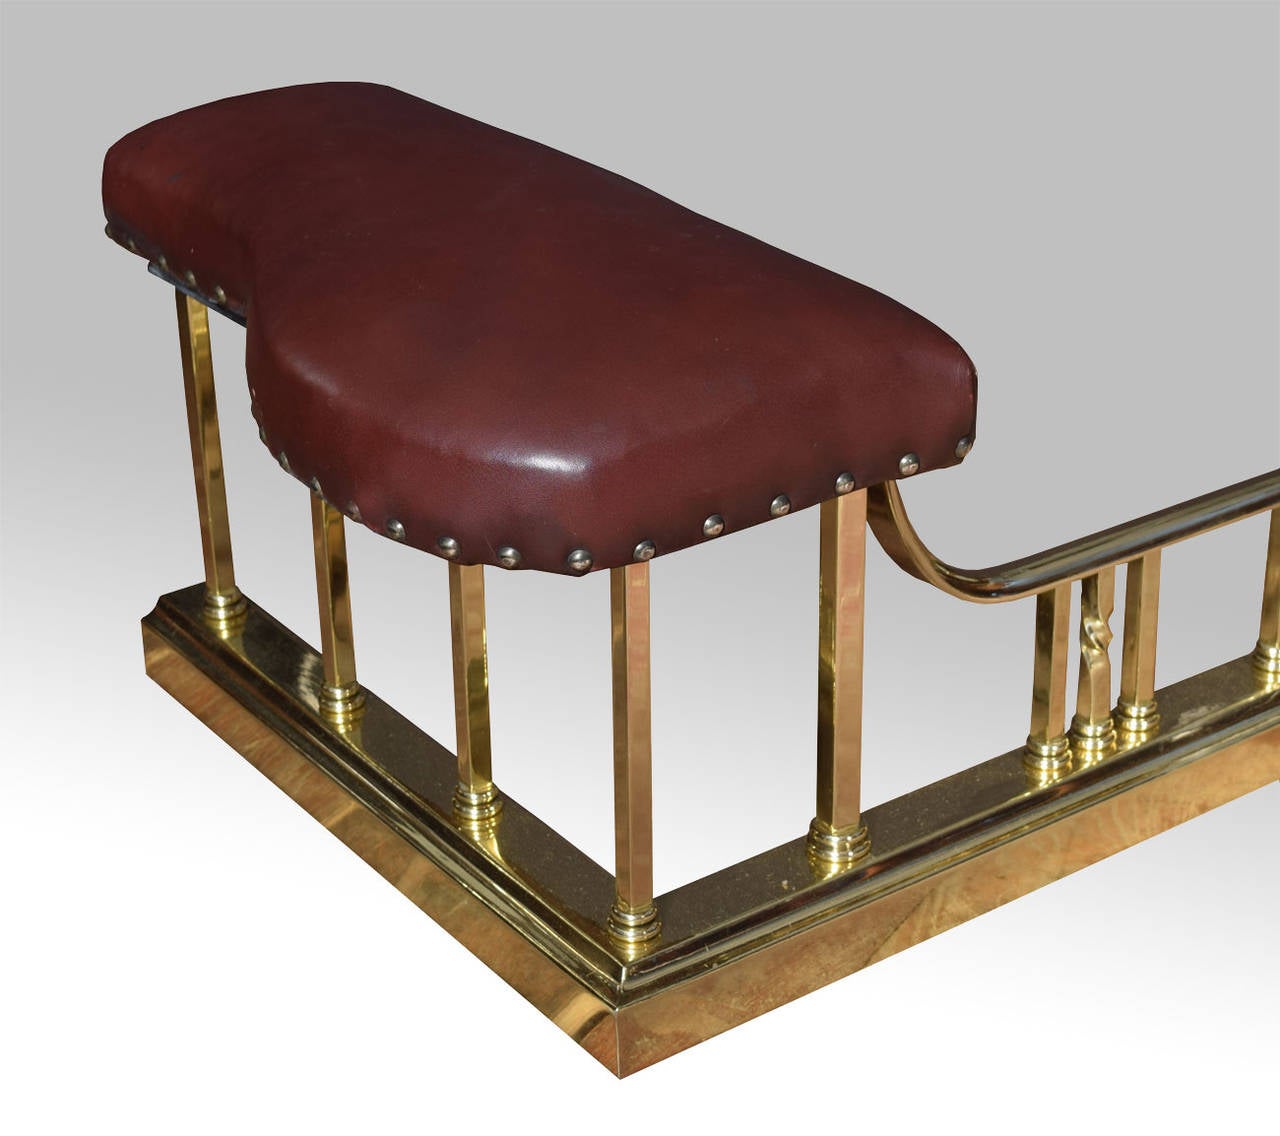 early 20th Century brass club fender, with two seat pads upholstered in dark red leather on decorative square and spiral twist supports.

Height 12.5 Inches

Internal measurements

Length 67 Inches

Depth 16 Inches

 External